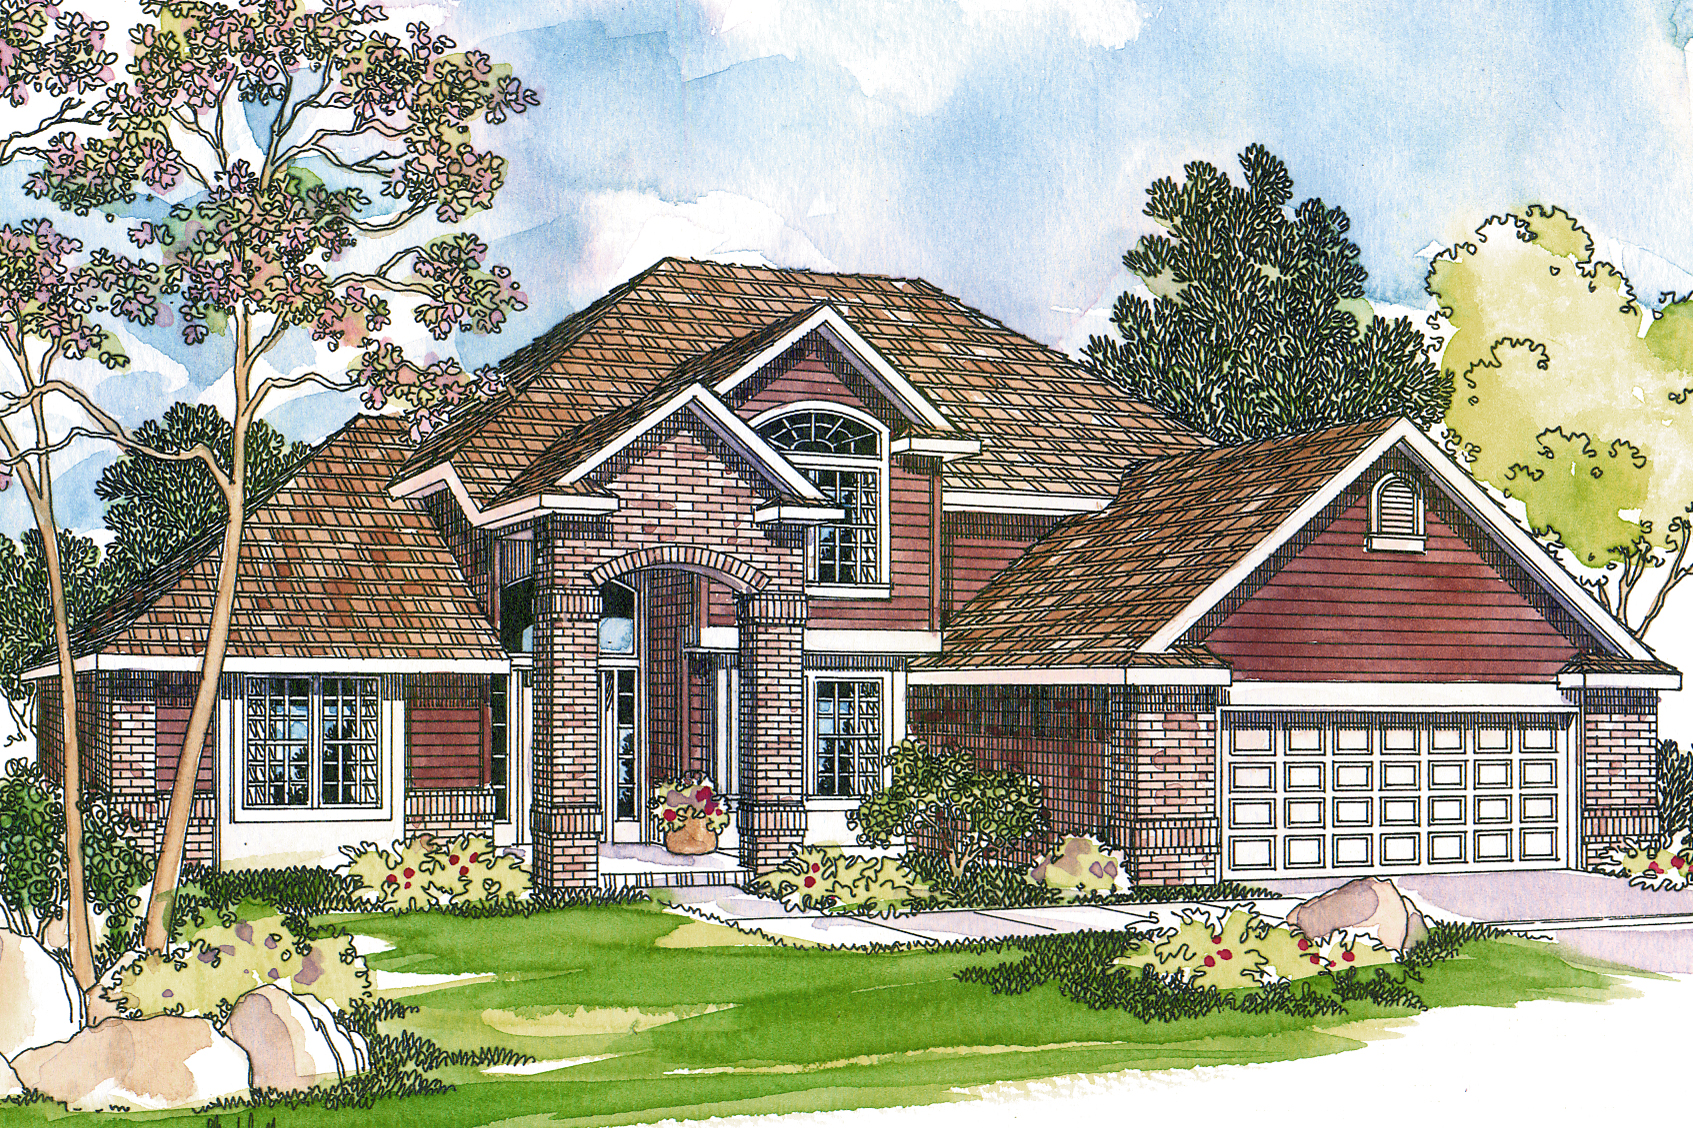 Traditional House Plan, Home Plan, Coleridge 30-251, 3 Bedrooms, View House Plan